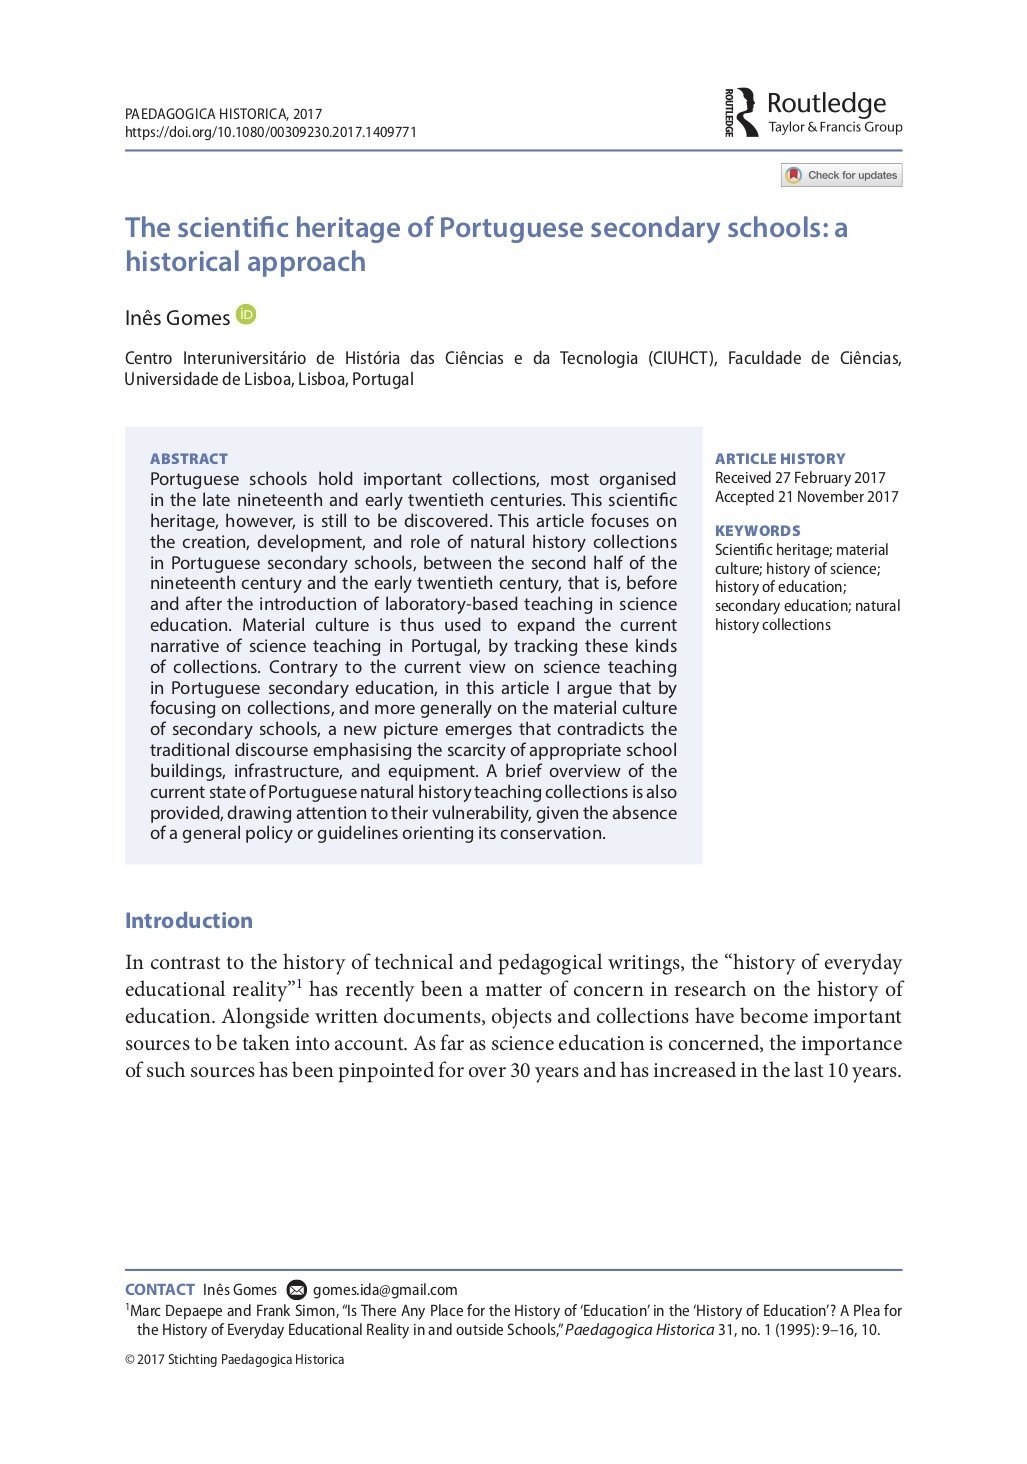 The scientific heritage of Portuguese secondary schools: a historical approach, Capa